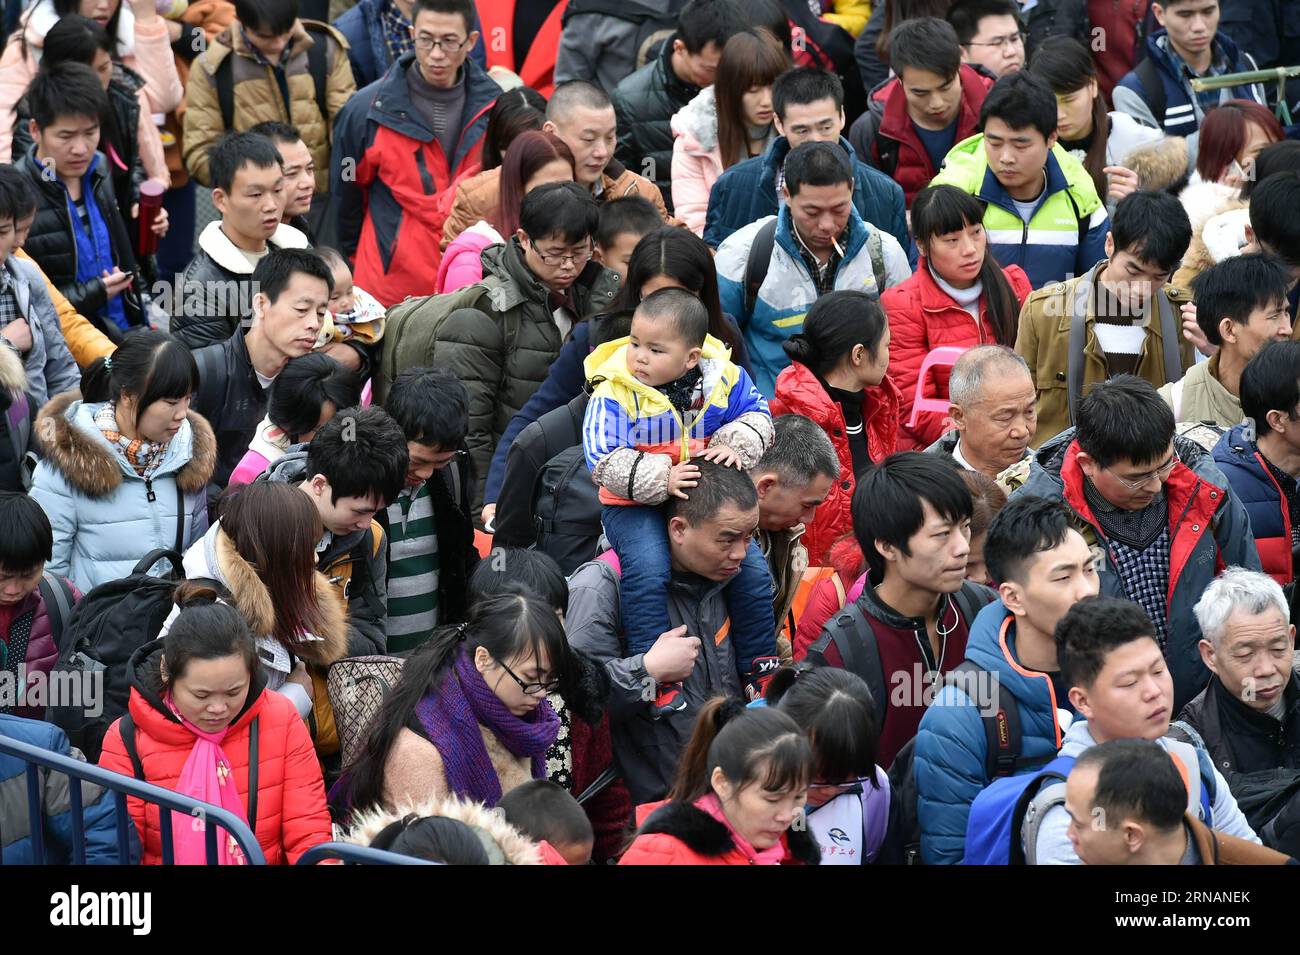 (160202) -- GUANGZHOU, Feb. 2, 2016 -- Passengers rushing home for the coming Spring Festival, or the Chinese Lunar New Year, are seen stranded out of Guangzhou railway station in Guangzhou,south China s Guangdong Province, Feb. 2, 2016. Some 50,000 passengers were detained in the railway station due to delays of trains caused by continous bad weather. ) (cxy) CHINA-GUANGZHOU-RAILWAY-PASSENGER-DELAY (CN) LiangxXu PUBLICATIONxNOTxINxCHN   Guangzhou Feb 2 2016 Passengers Rushing Home for The Coming Spring Festival or The Chinese Lunar New Year are Lakes stranded out of Guangzhou Railway Station Stock Photo